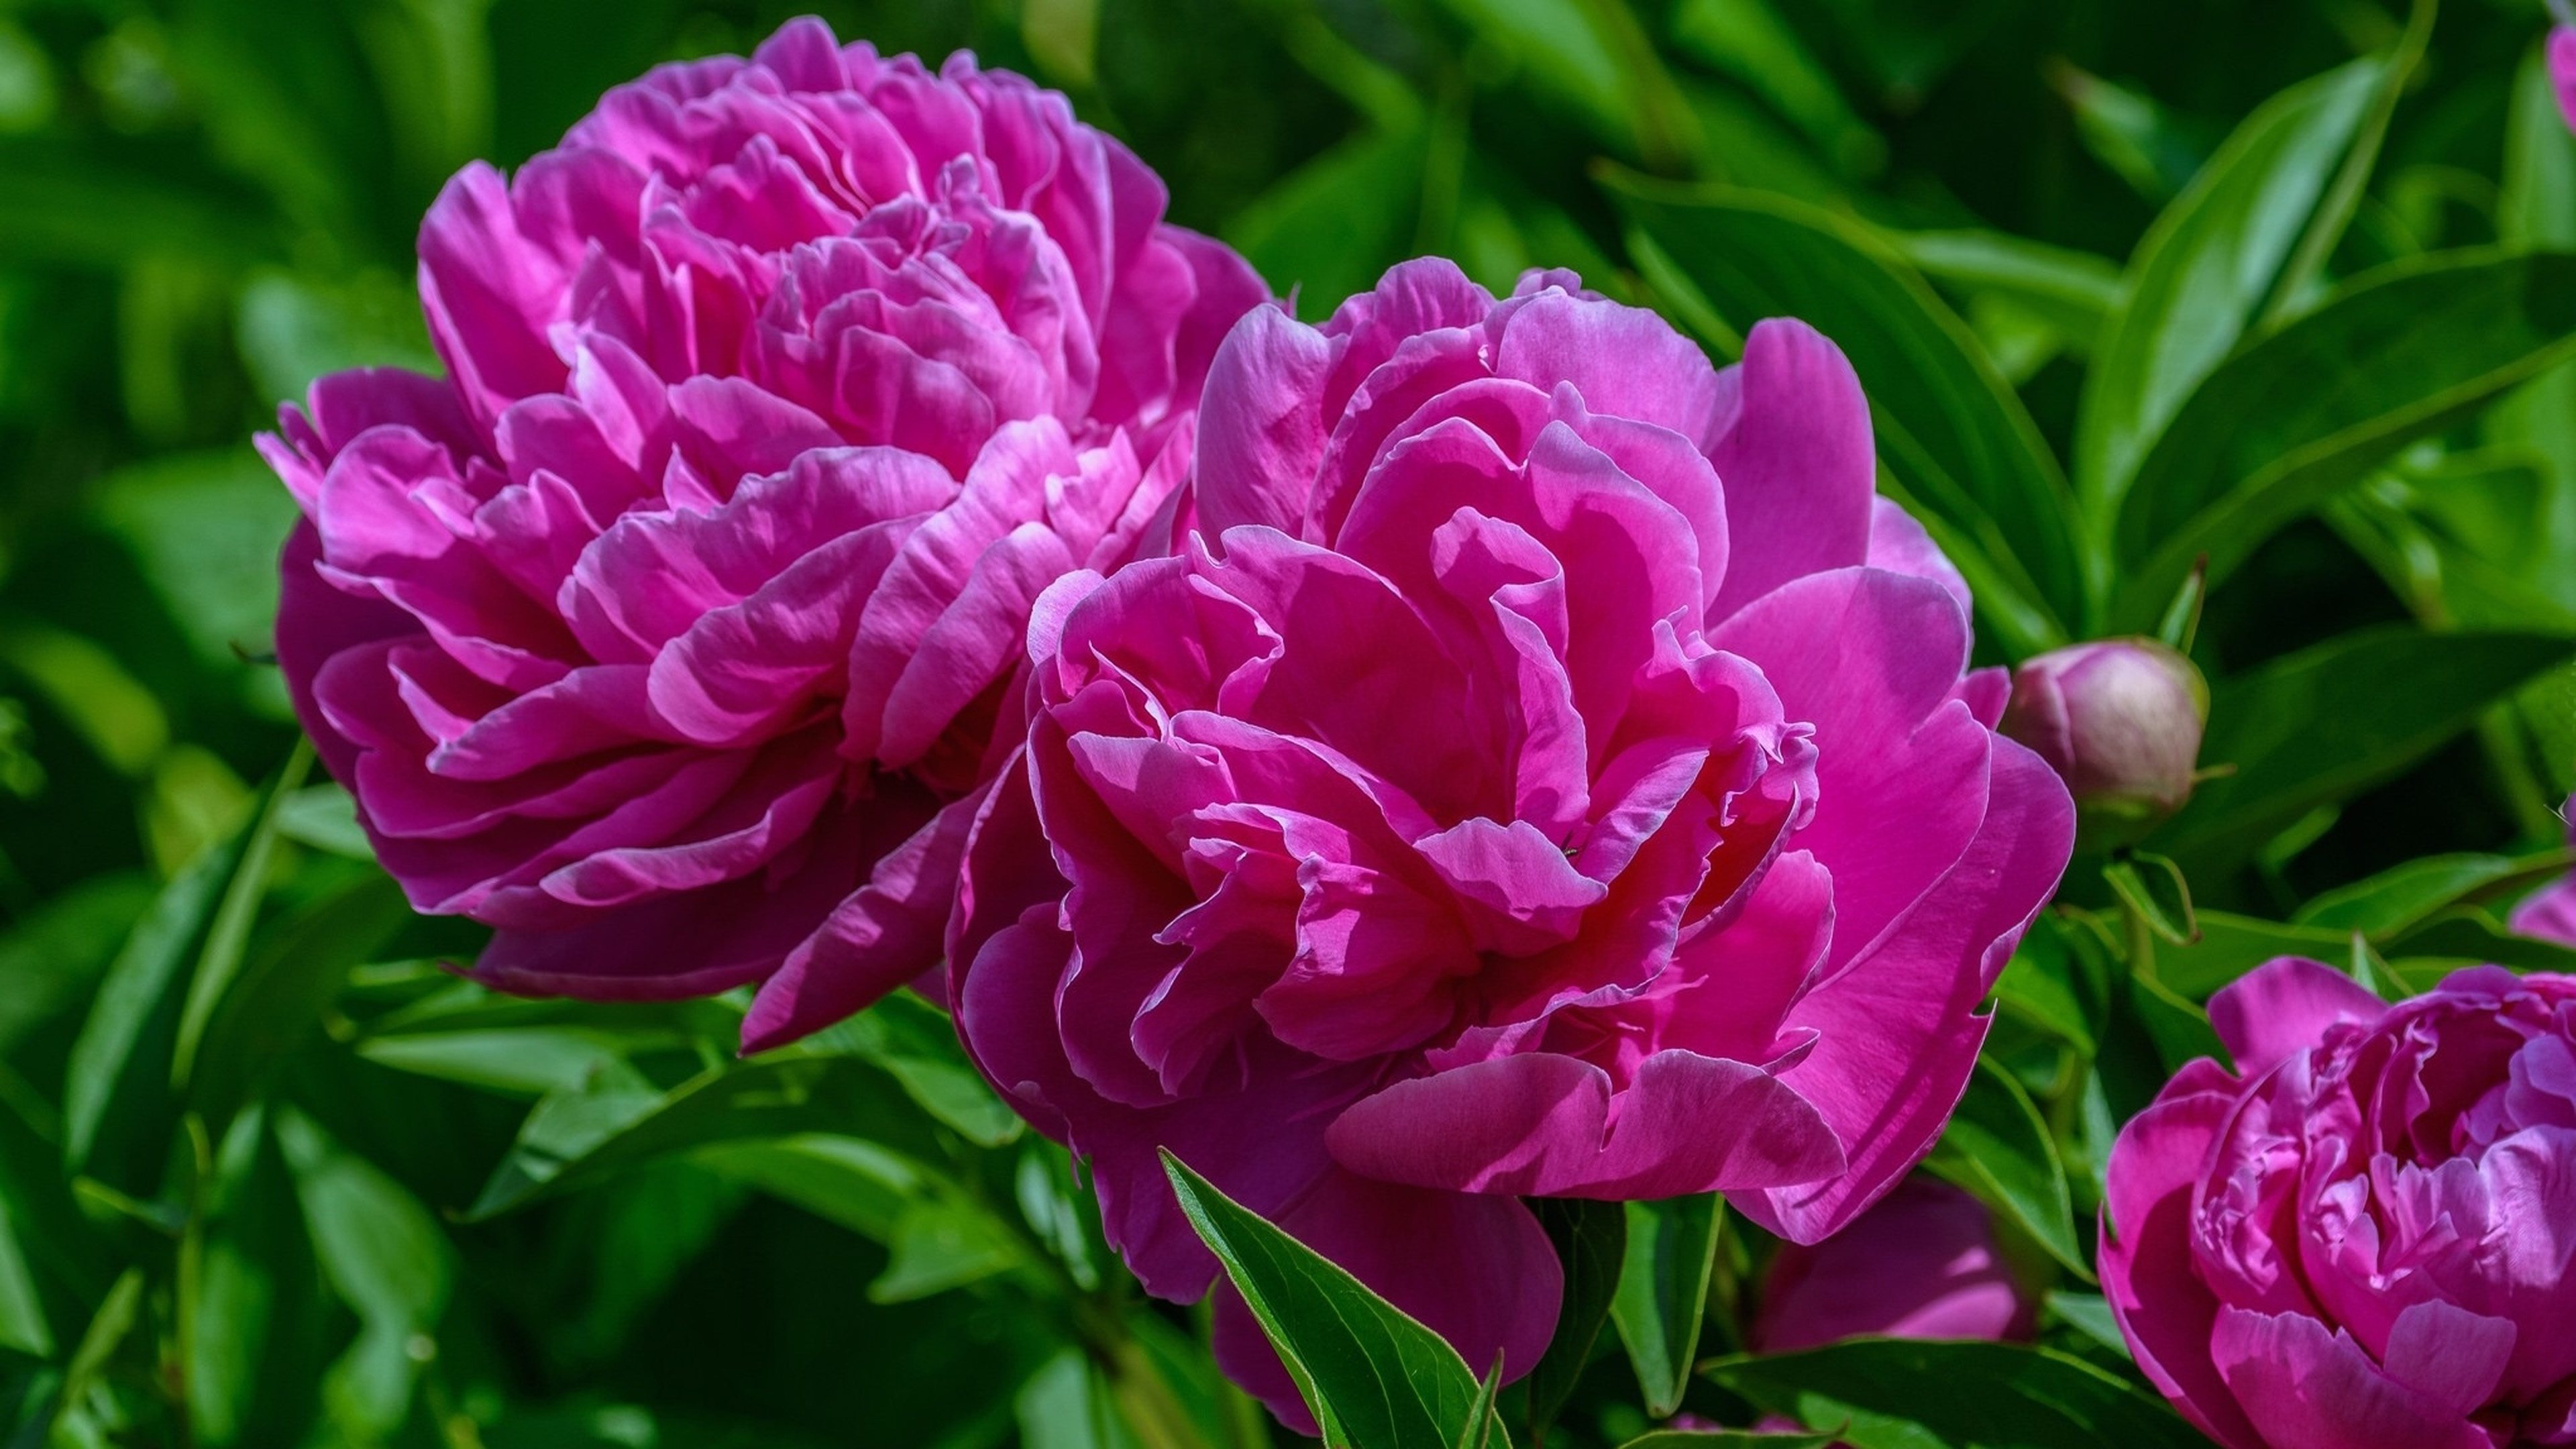 Pink Peony Flower Of Garden Best Hd Wallpapers For Desktop Tablets And